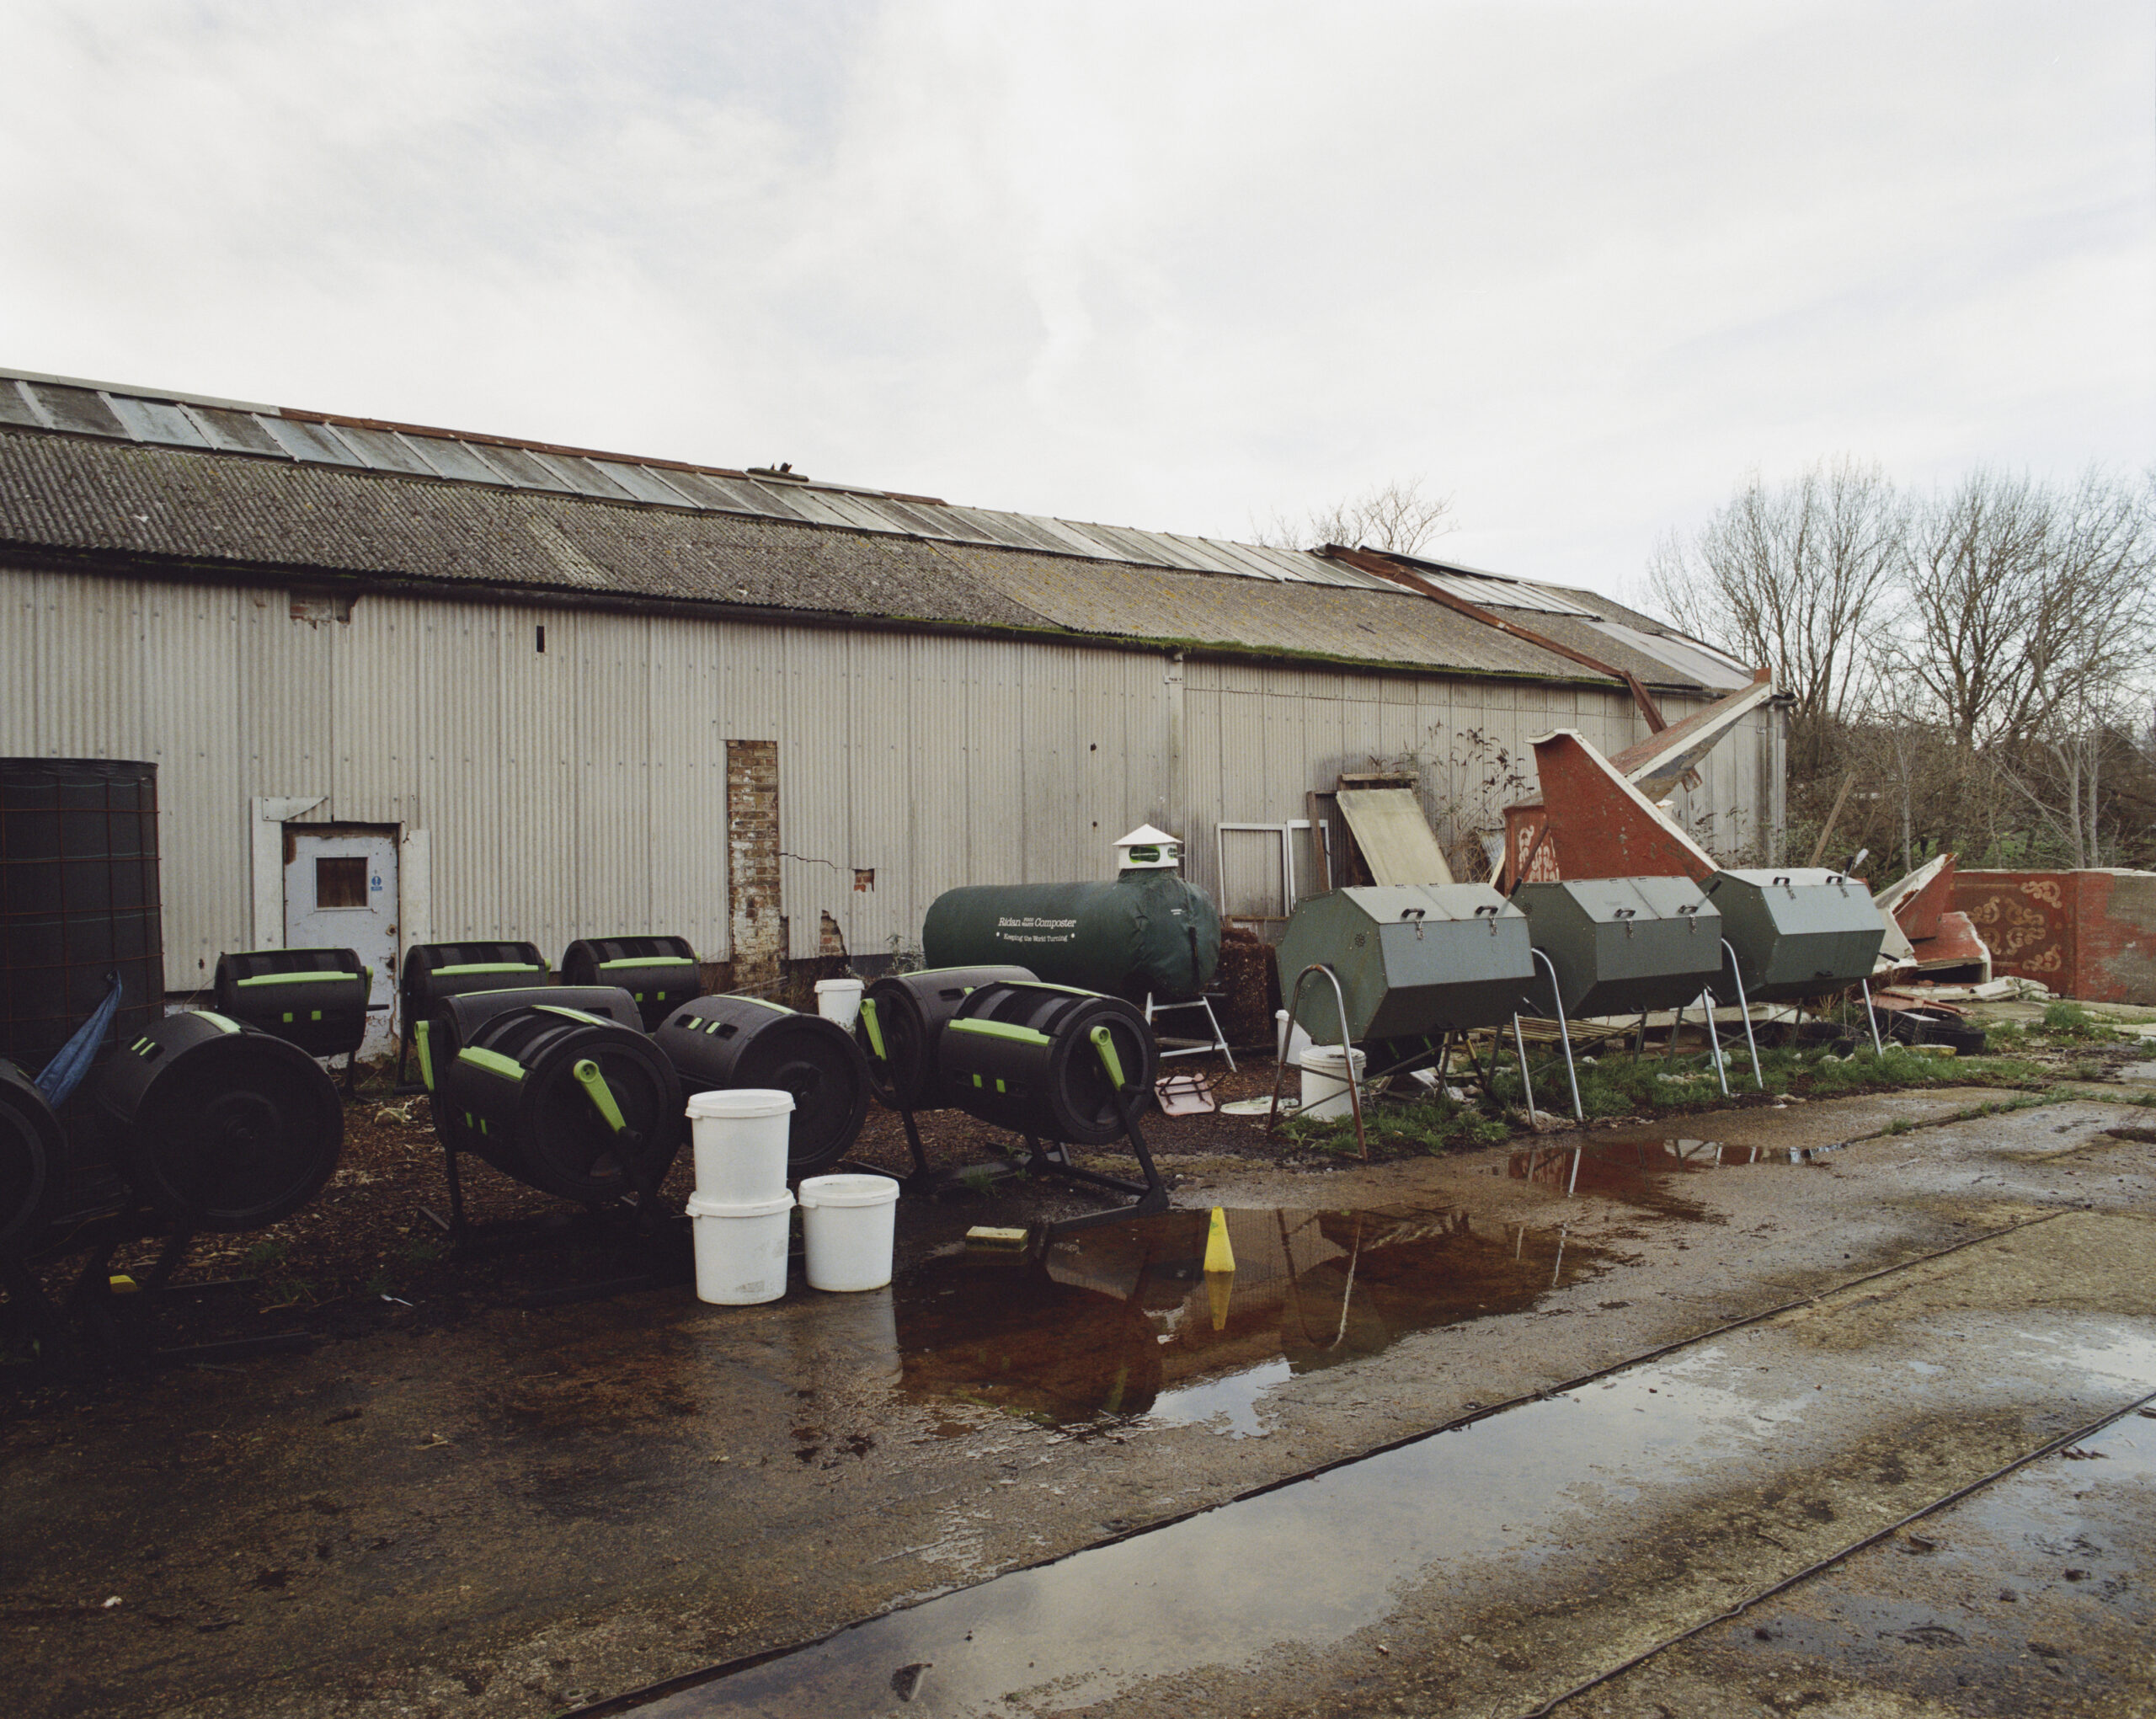 In front of a large shed are a group of tumblers that Michael uses to create compost. To the right are the bigger green tumblers, the smaller black tumblers are on the left. In front is a concrete road covered in puddles of water.